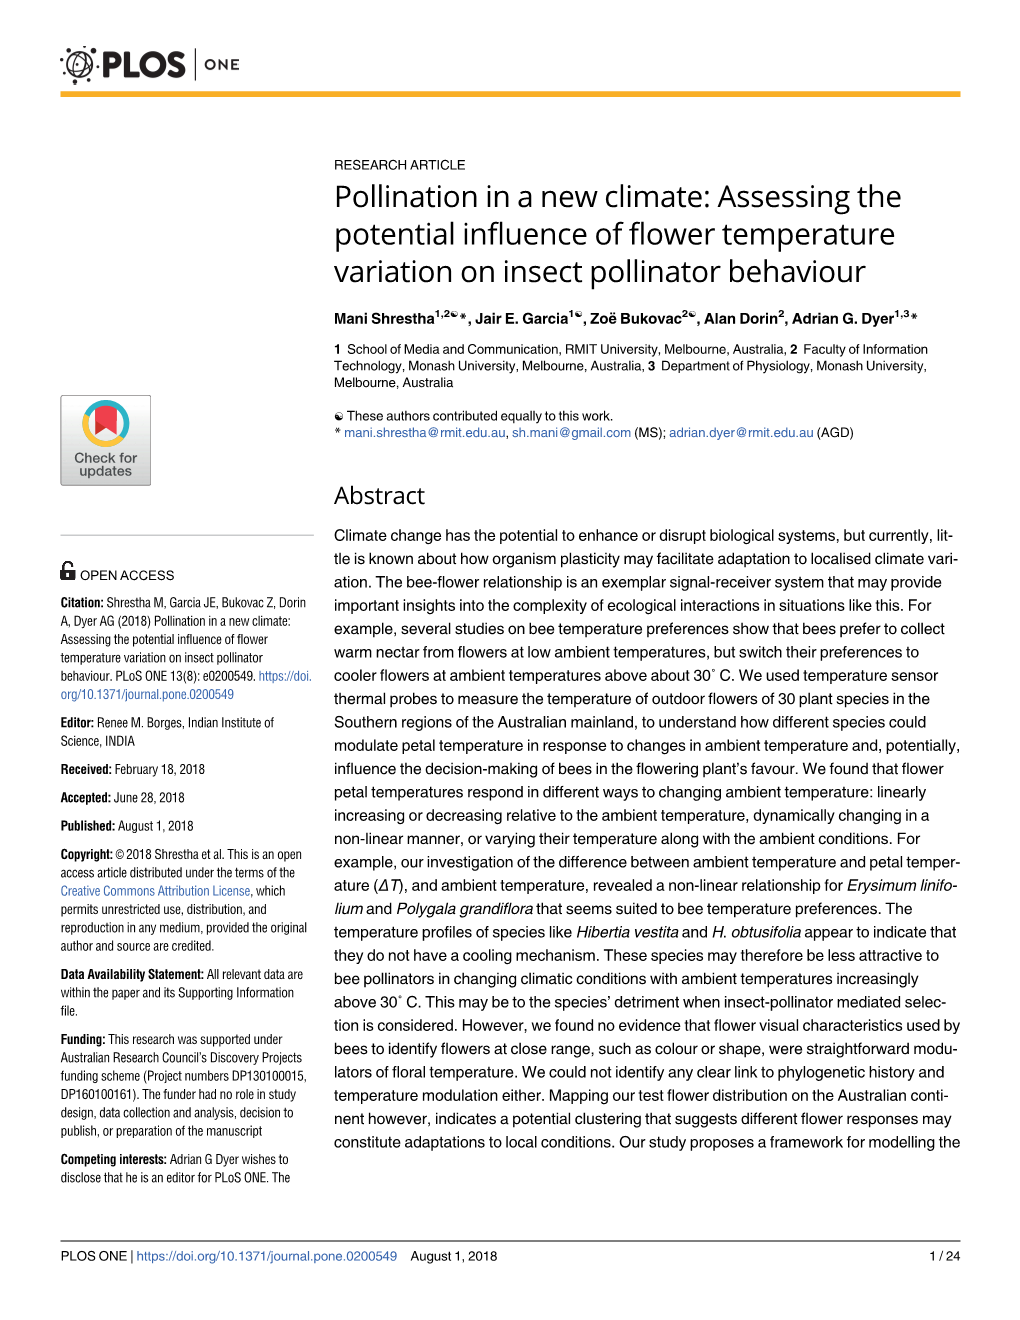 Pollination in a New Climate: Assessing the Potential Influence of Flower Temperature Variation on Insect Pollinator Behaviour